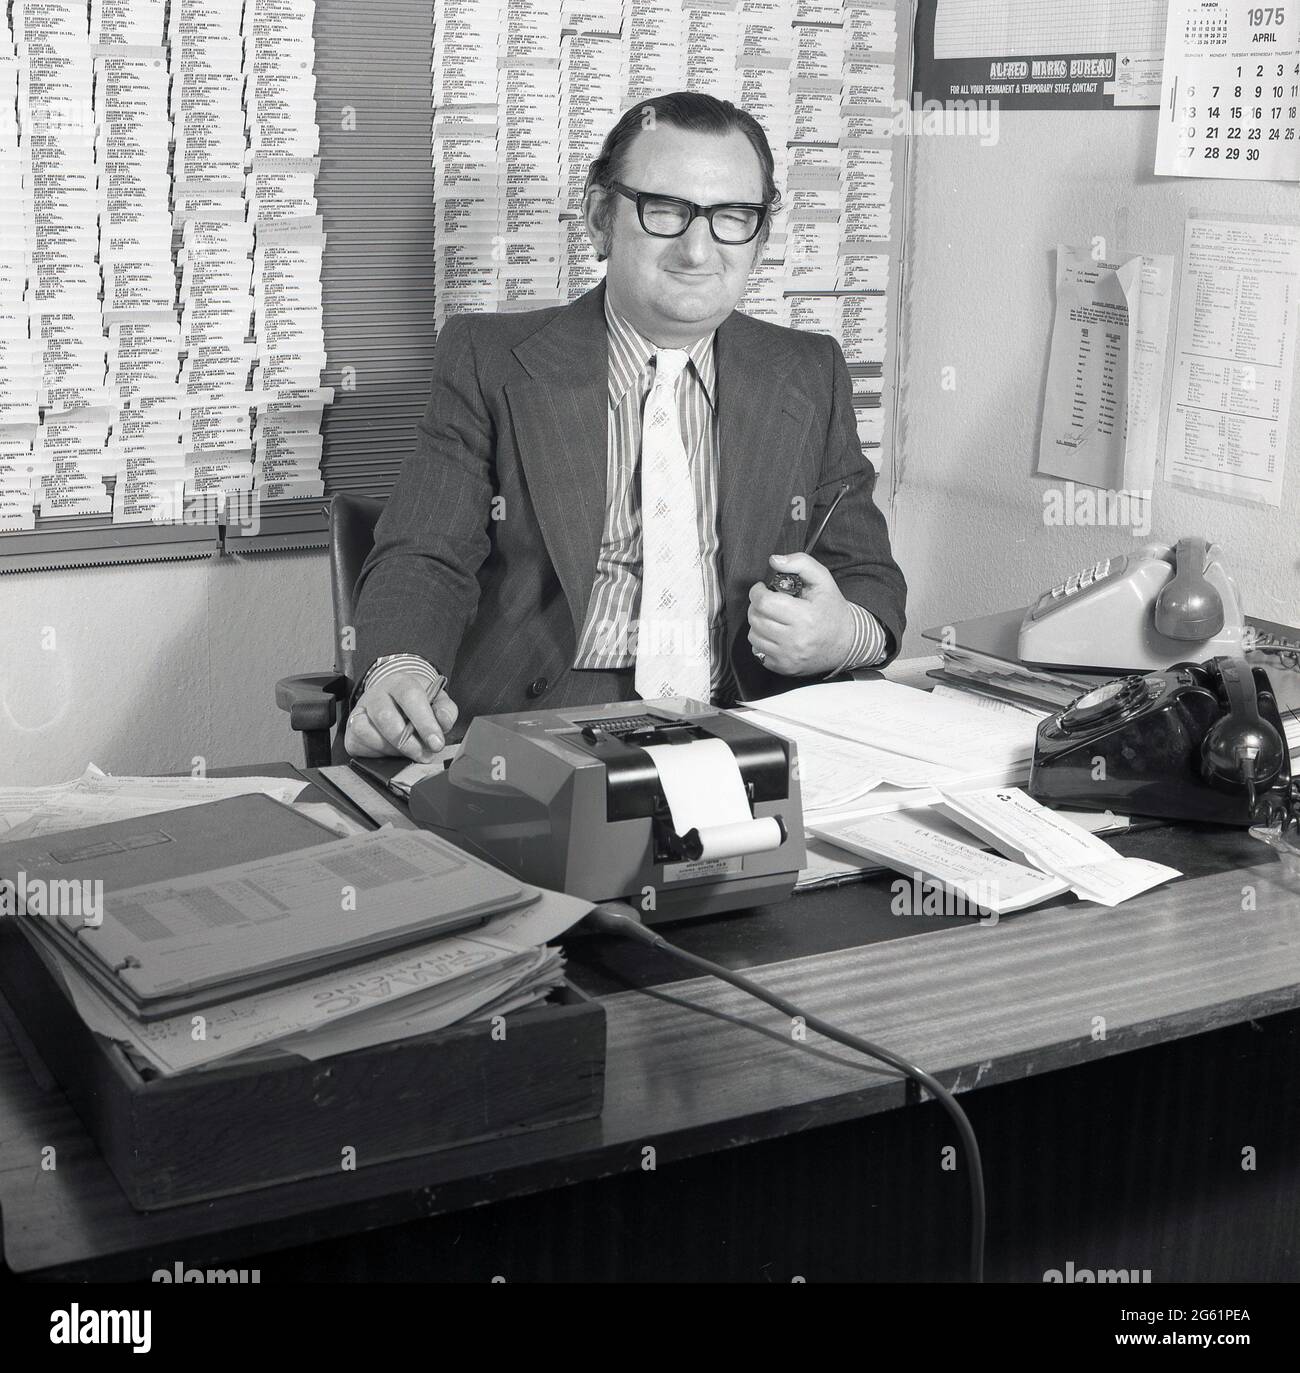 1970s, historical, inside an office, sitting at his desk, pipe in hand, a suited executive working in auto finance, with two telephones, paperwork and a mechanical adding machine around him, Croydon, England, UK. A walled customer/supplier card index is on the wall behind him. The financing of motor cars is big business. GMAC, an acronym for General Motors Acceptance Corporation was founded in 1919 and was part of the US car giant, General Motors, who owned the Vauxhall car brand in the UK, which they had acquired in 1925. Stock Photo